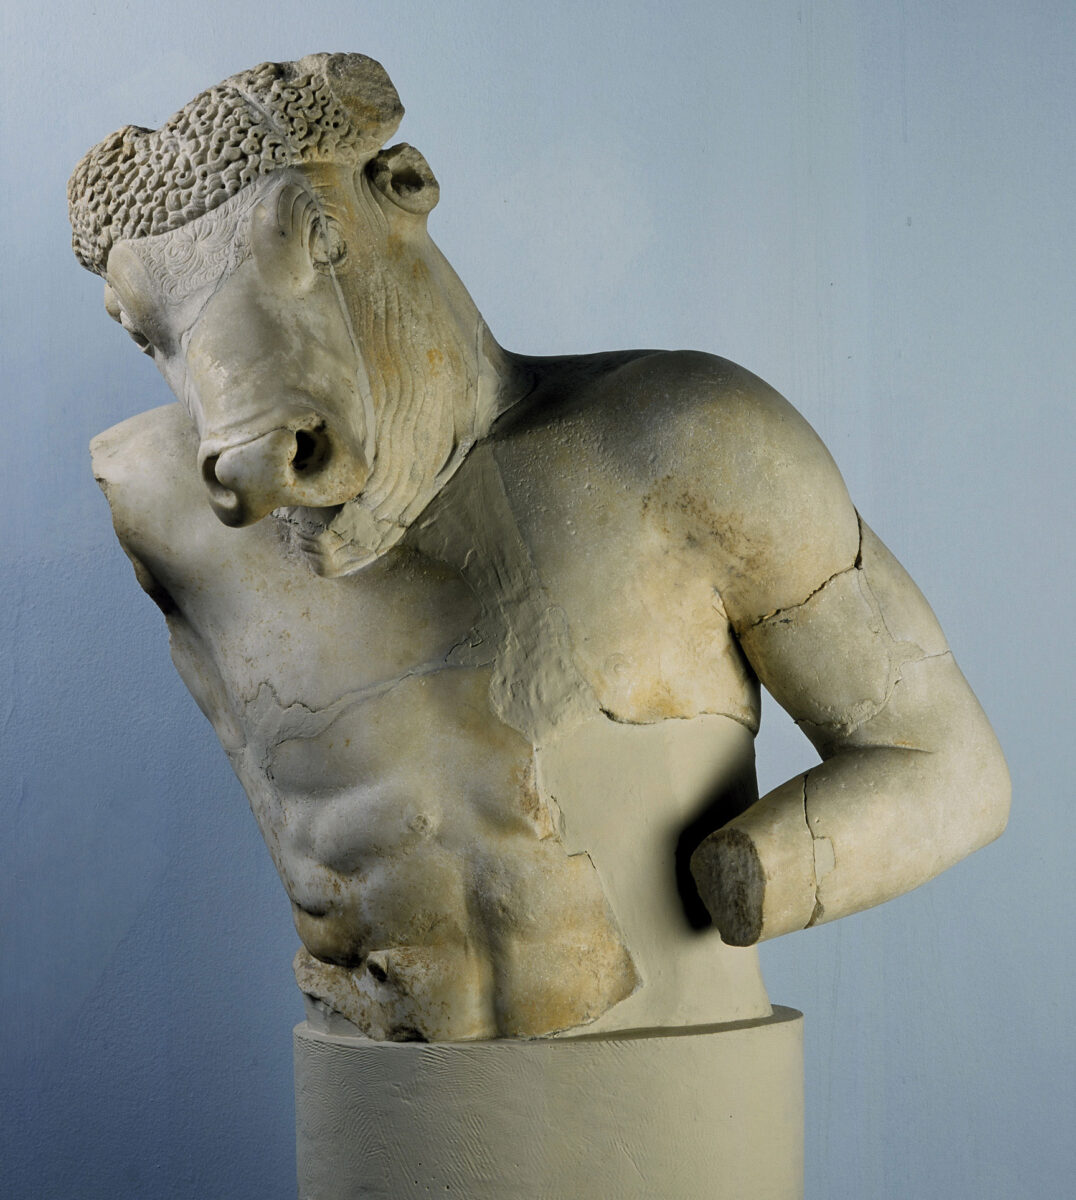 Marble sculpture of the Minotaur, 1-300 CE, National Archaeological Museum, Athens © Hellenic Ministry of Culture and Sports / Hellenic Organization of Cultural Resources Development